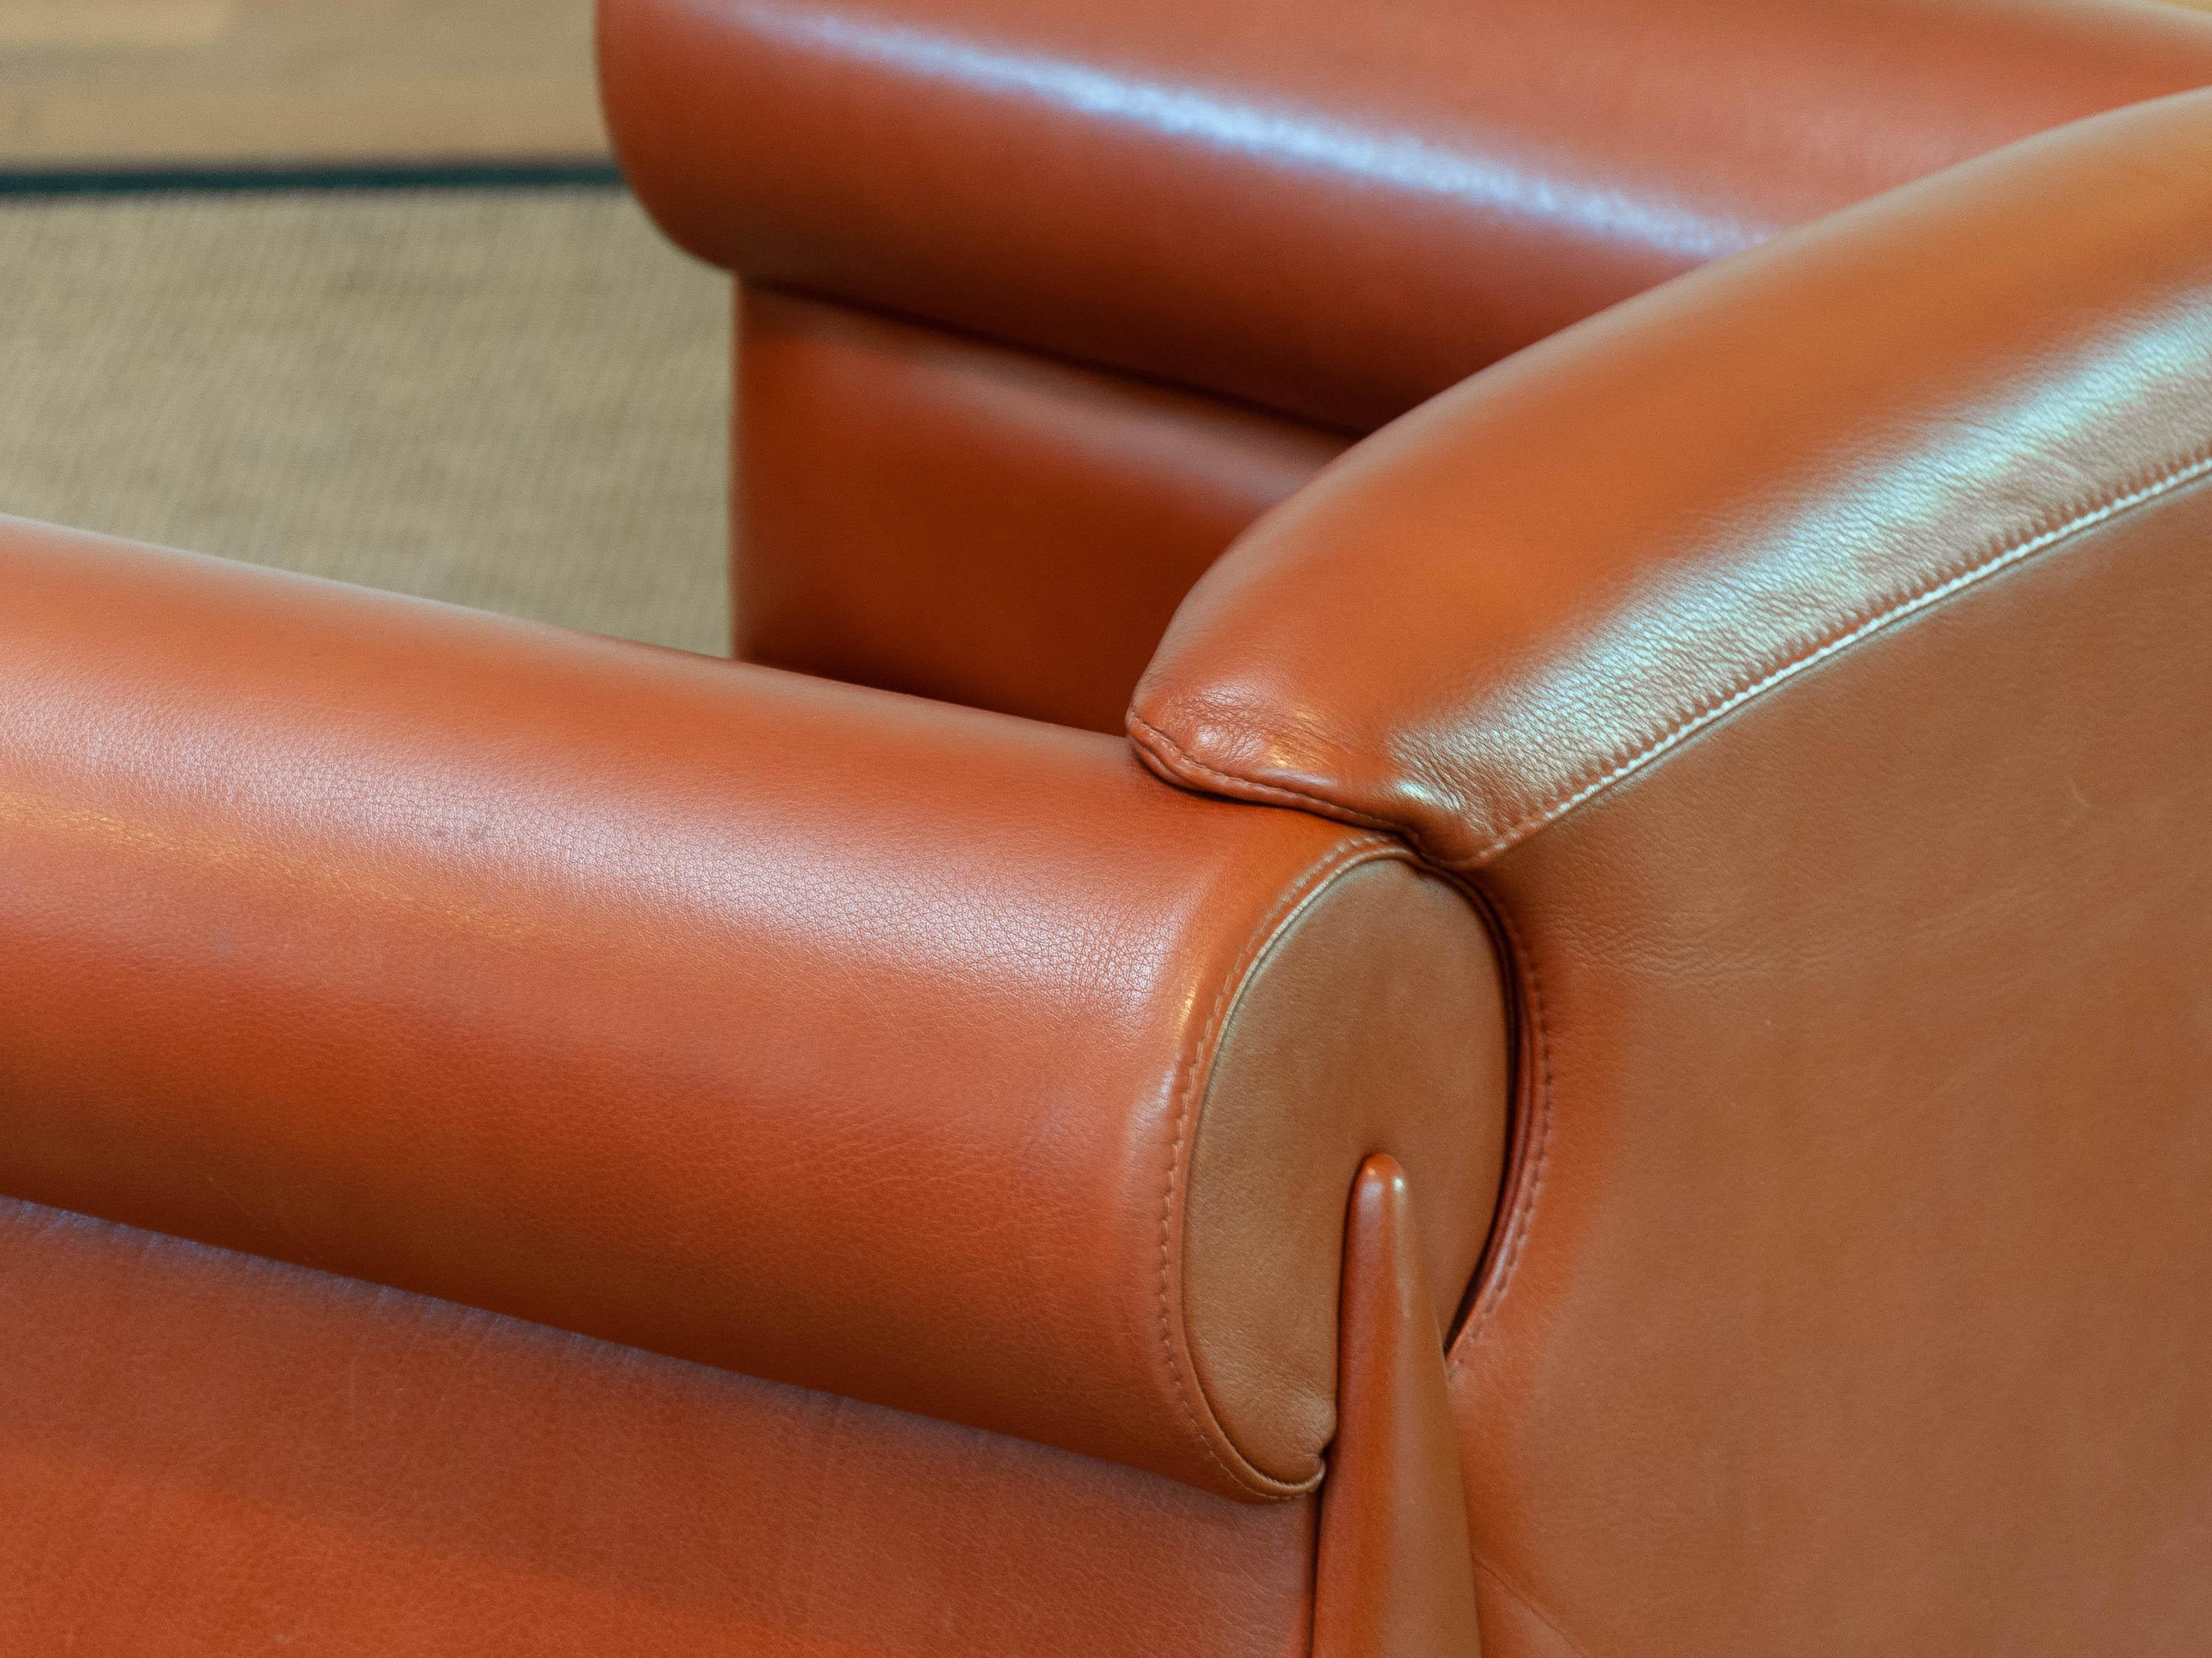 1980s Modern Lounge / Club Chair in Cognac Leather by Klaus Wettergren Denmark For Sale 2